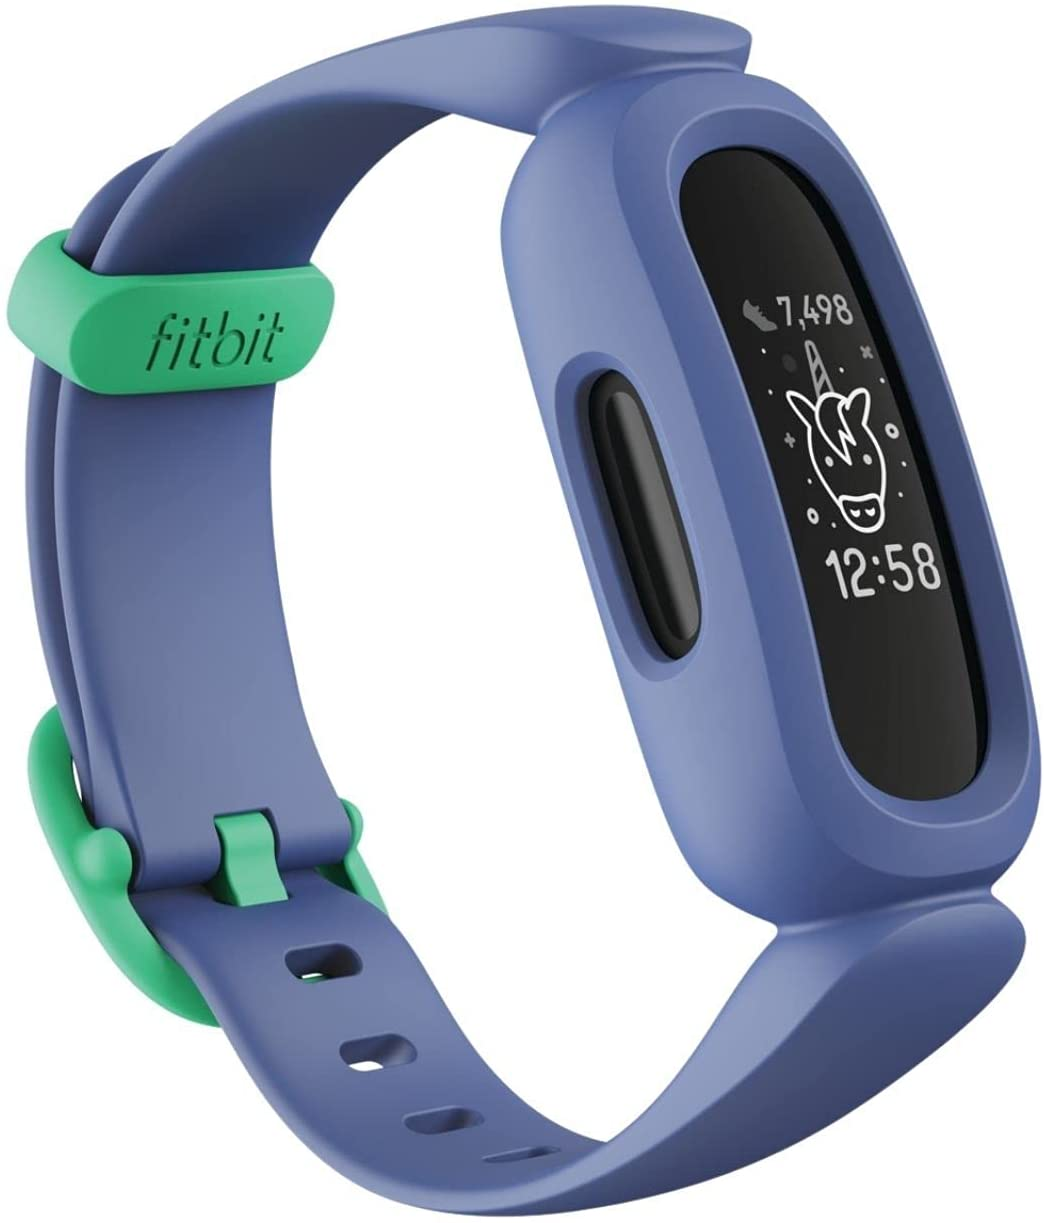 Amazon.com: Fitbit Ace 3 Activity Tracker for Kids 6+, Blue, Black, or Yellow $49.95